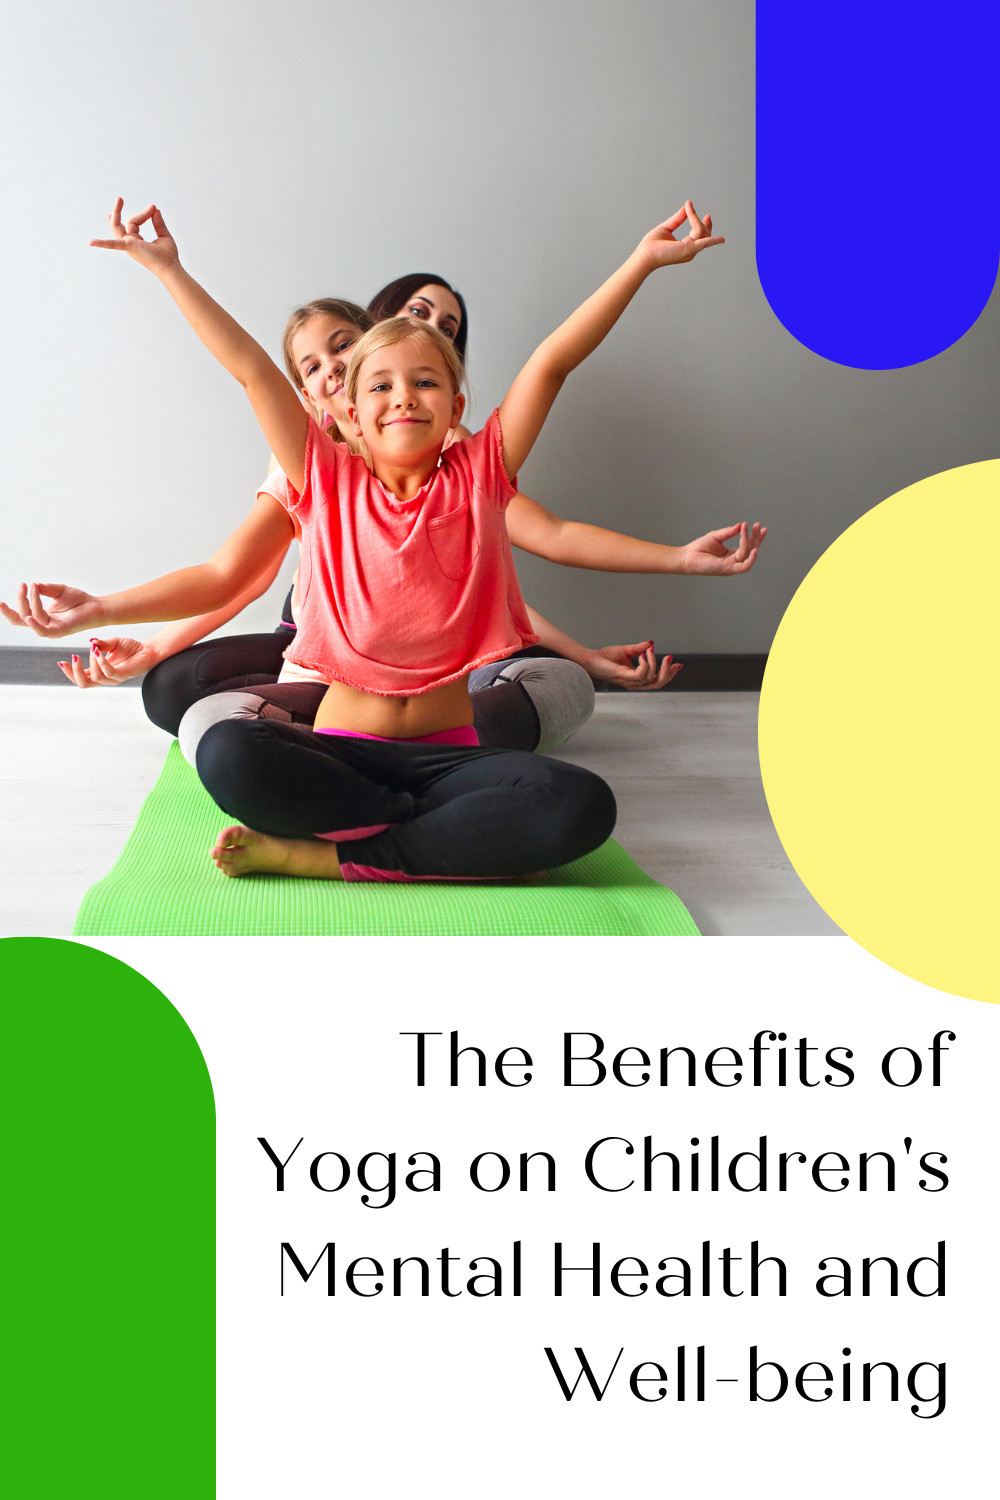 The Benefits of Yoga on Children's Mental Health and Well-being